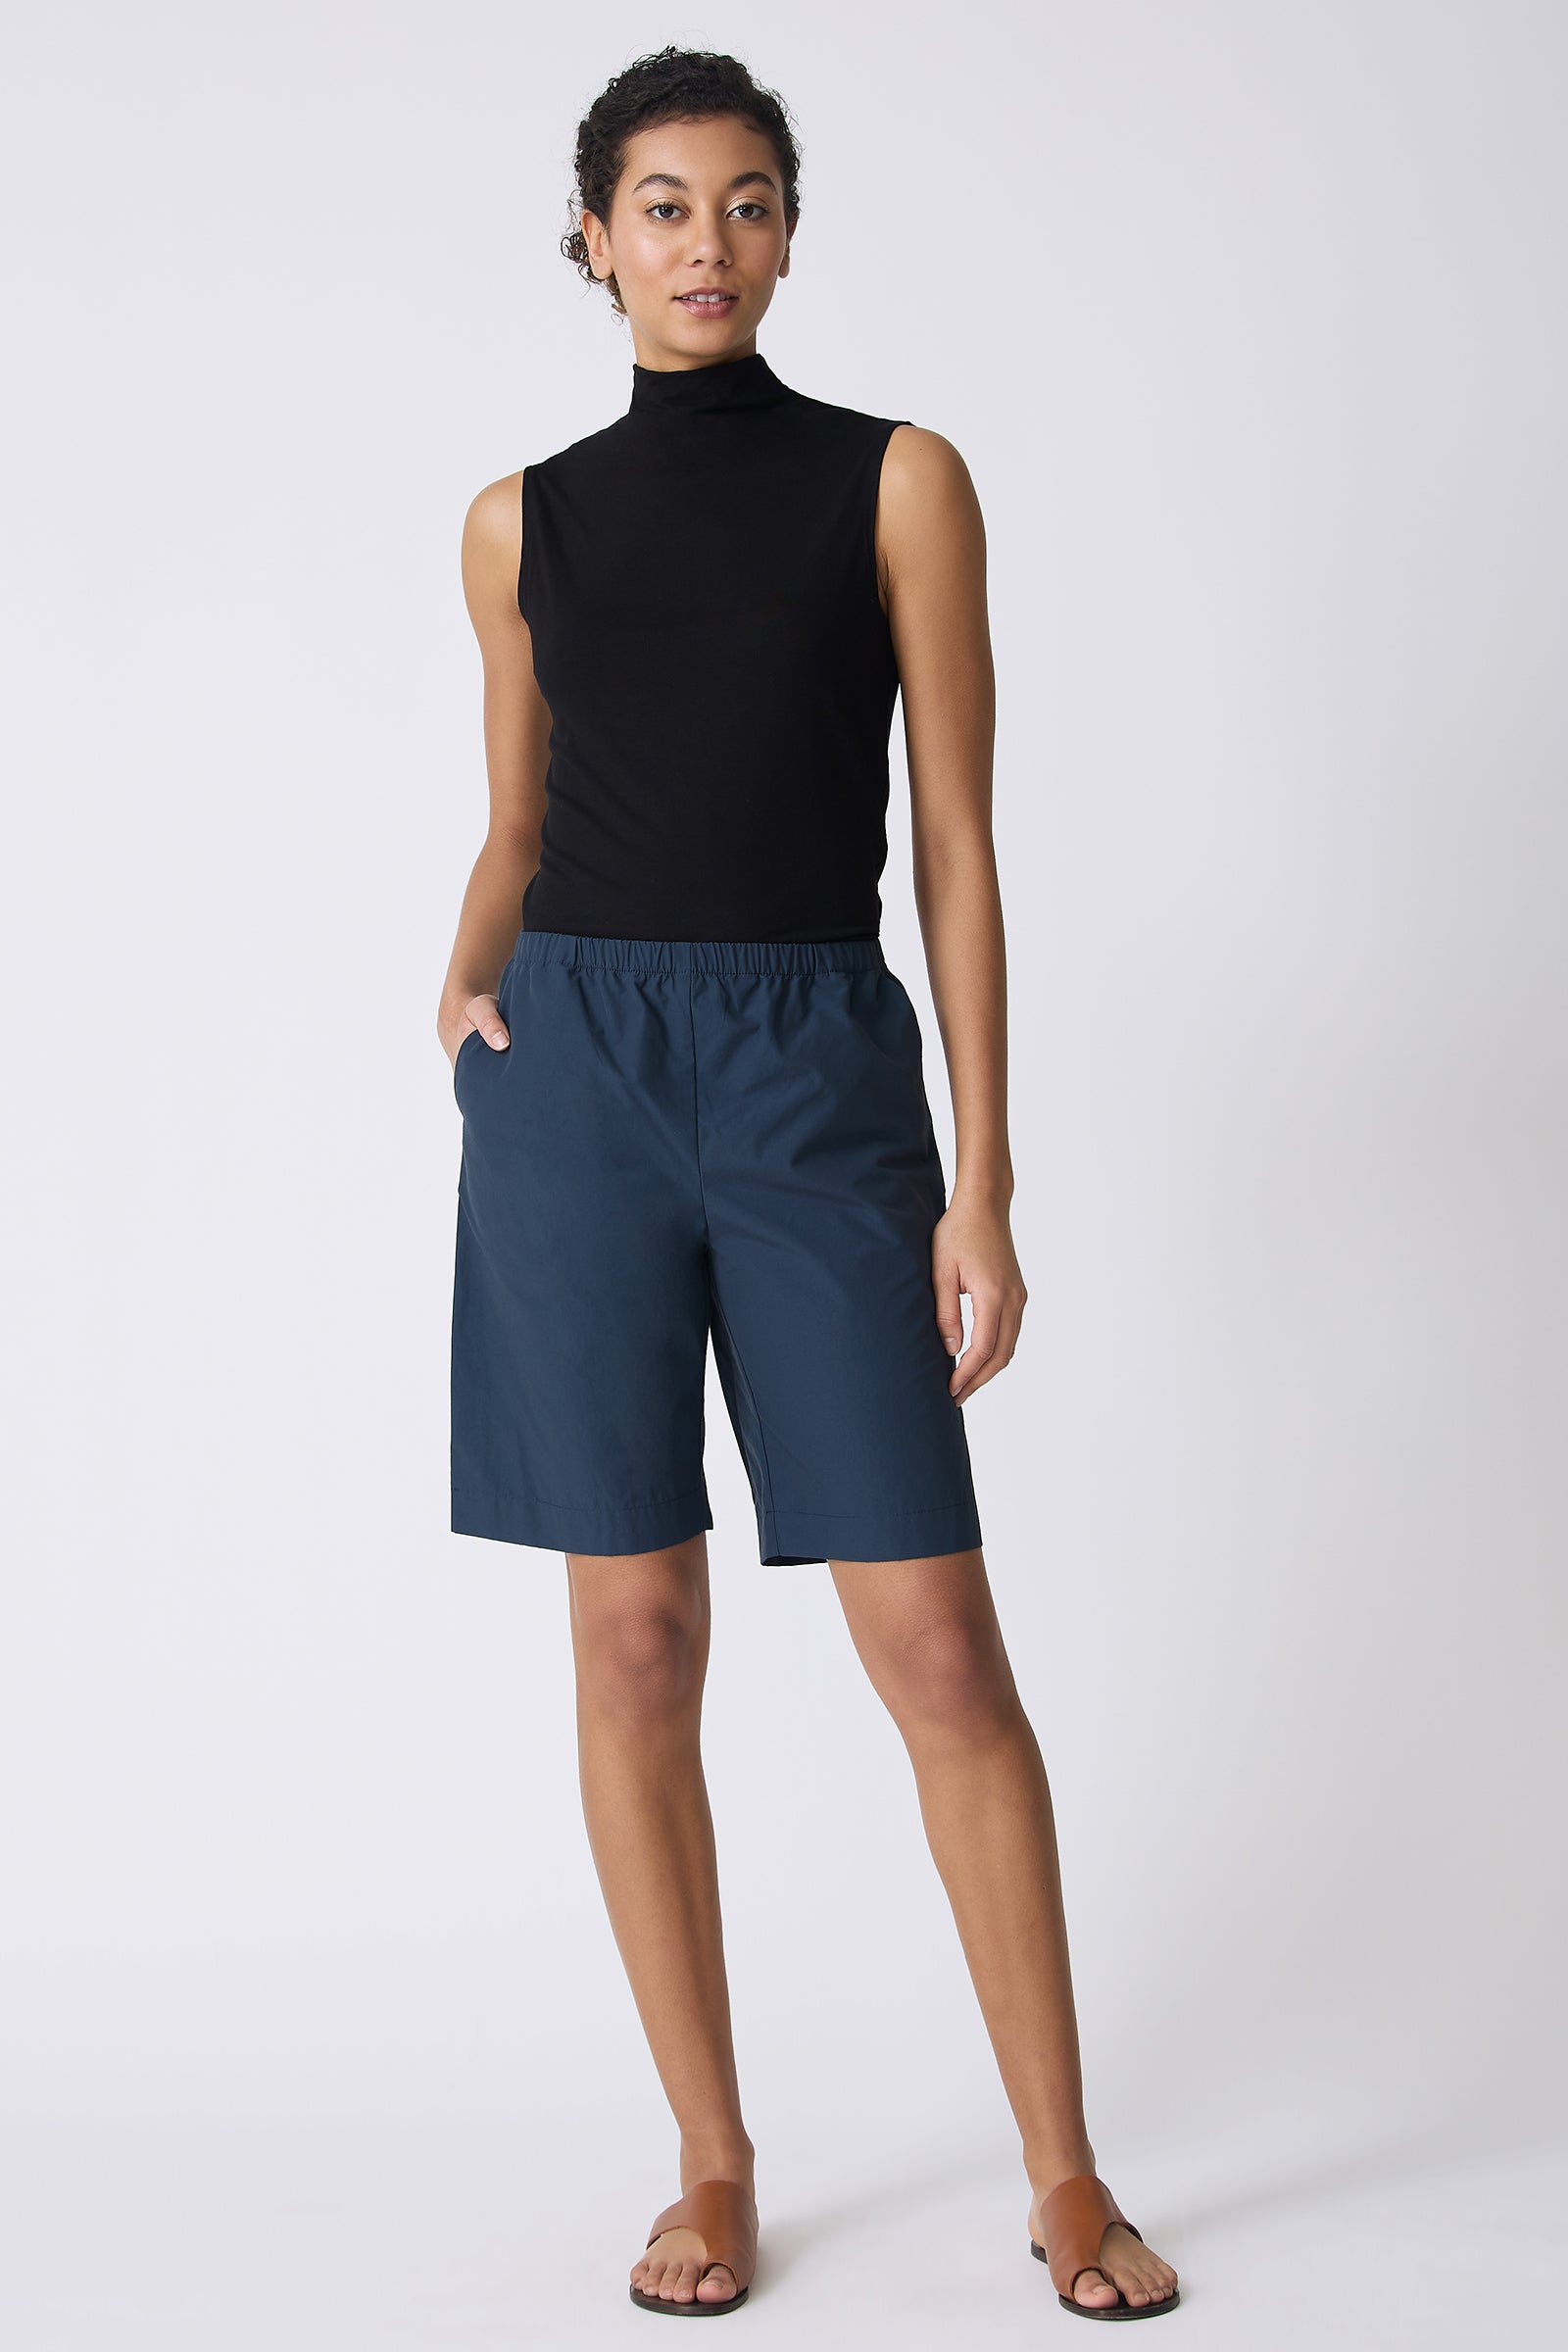 Kal Rieman Bahama Short in Summer Navy on model with hand in pocket full front view